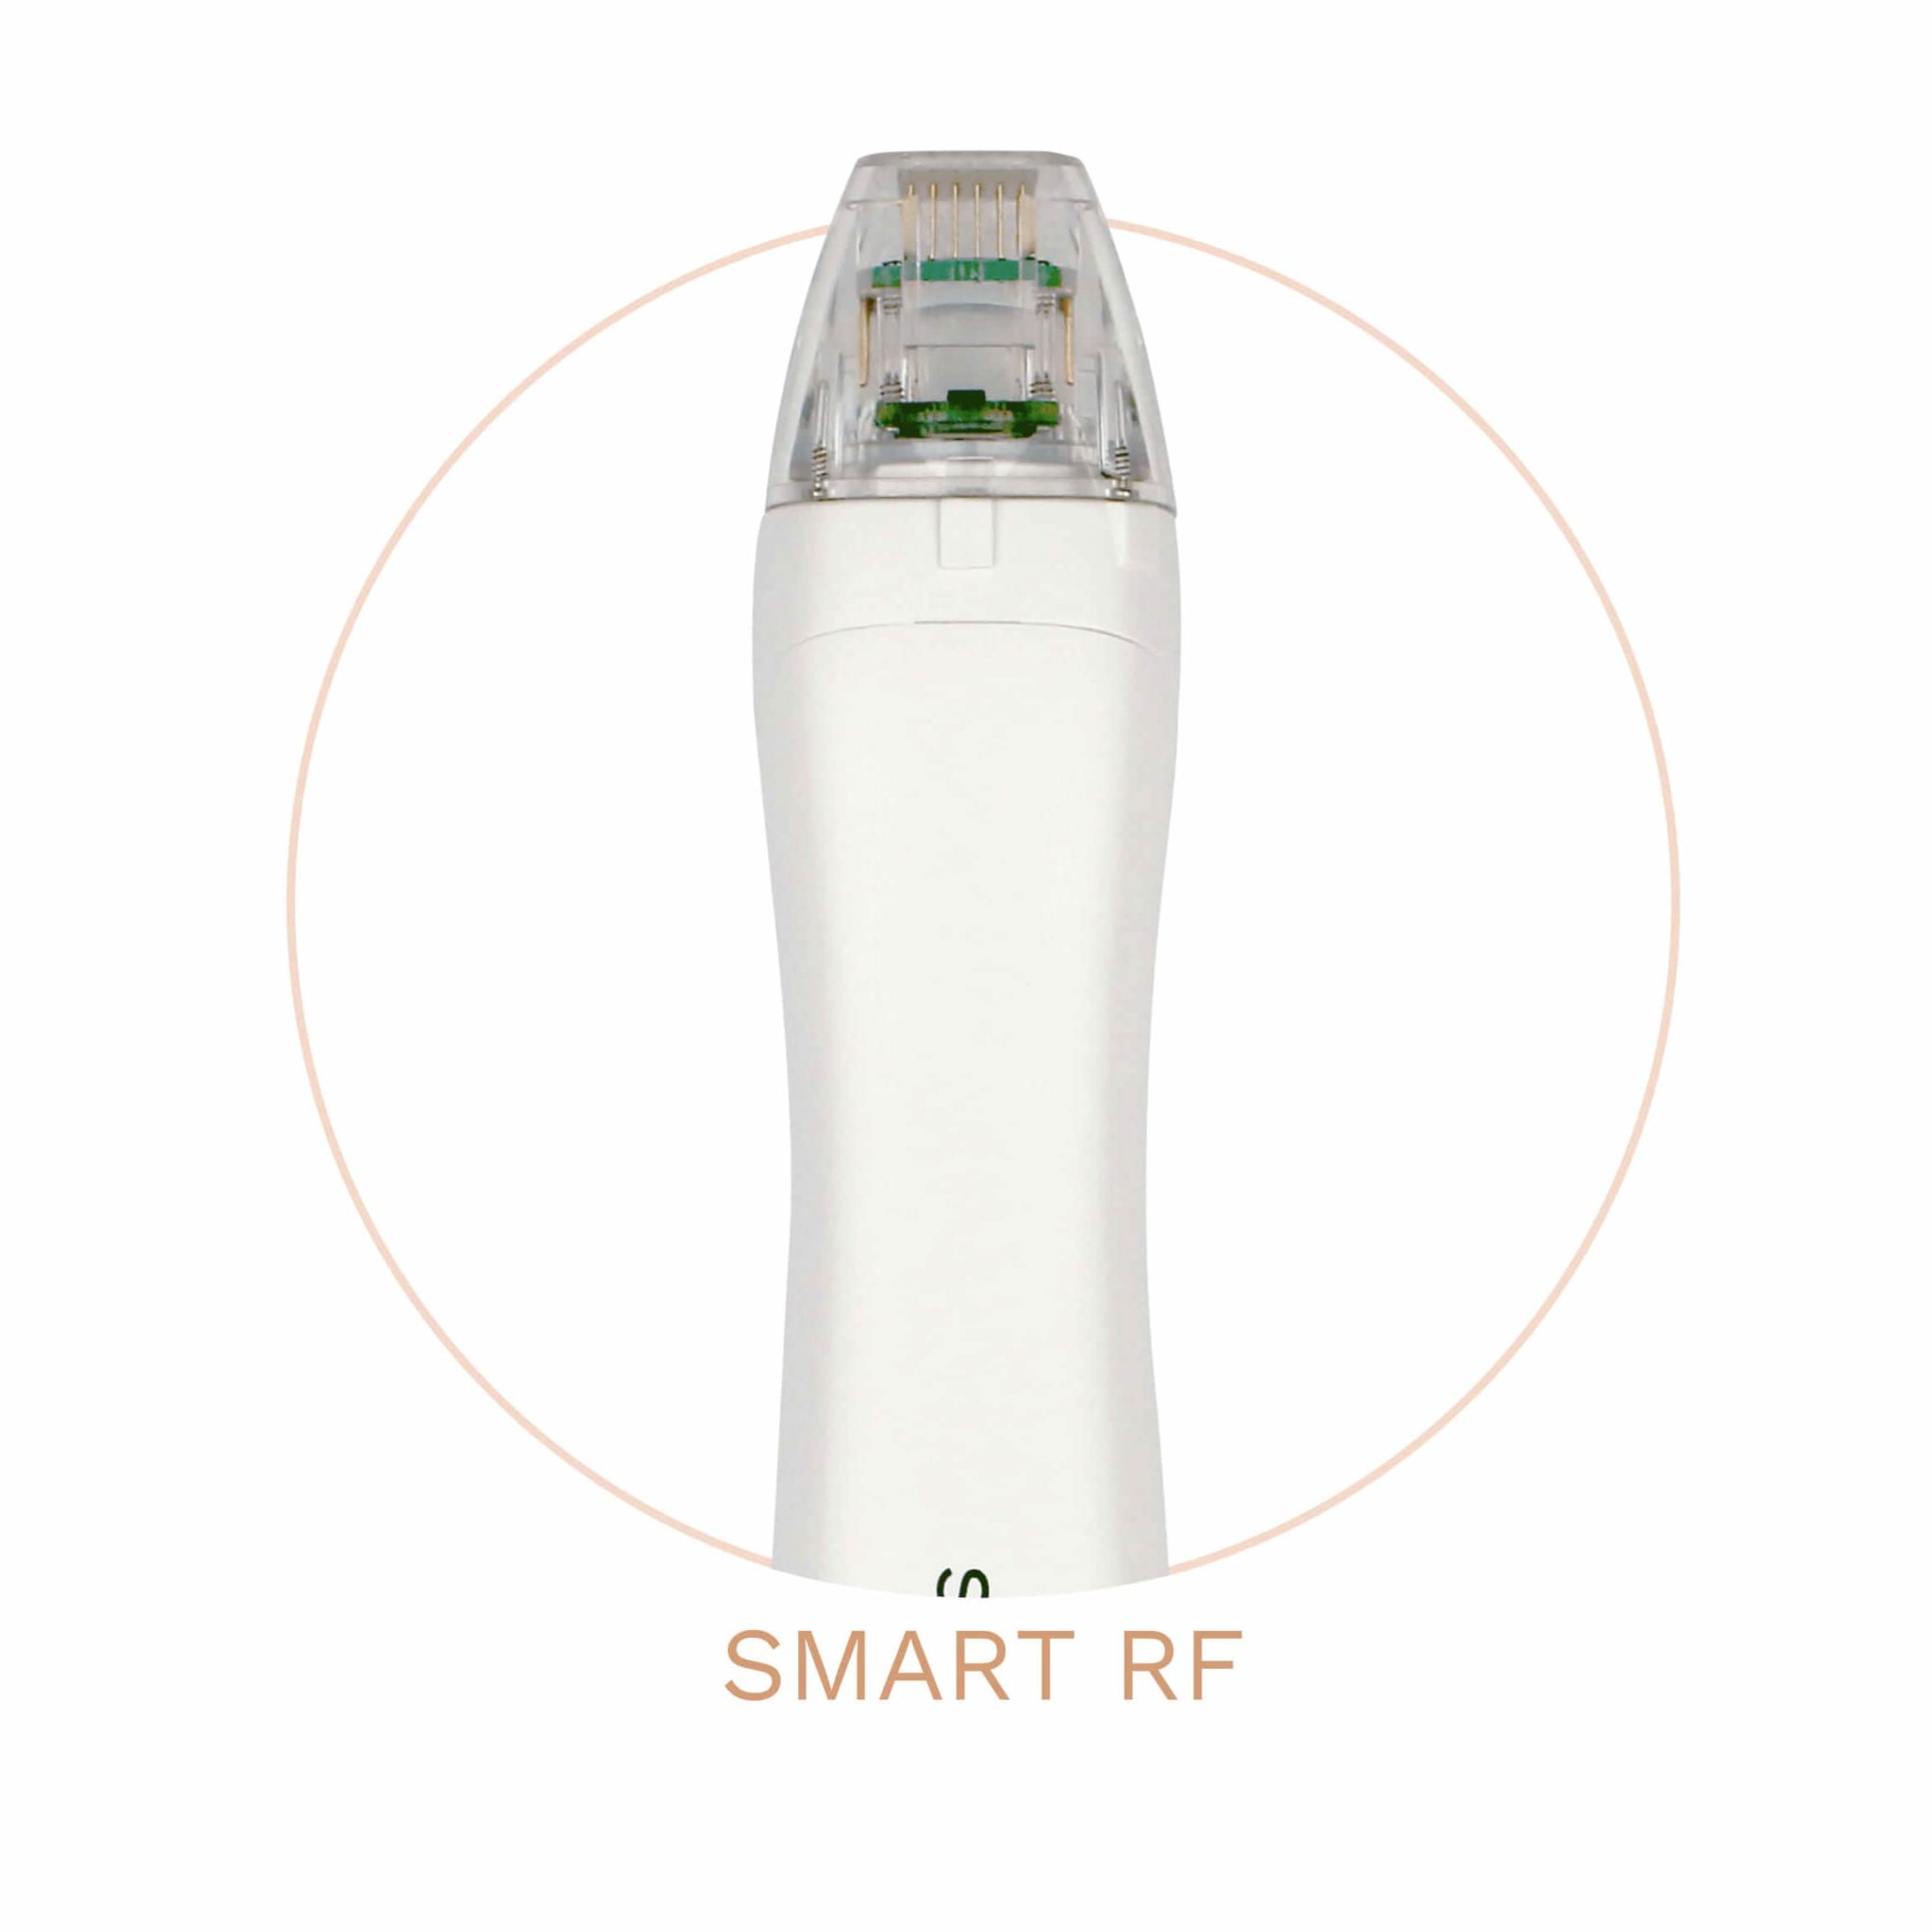 Smart RF perfect for the Face and Neck